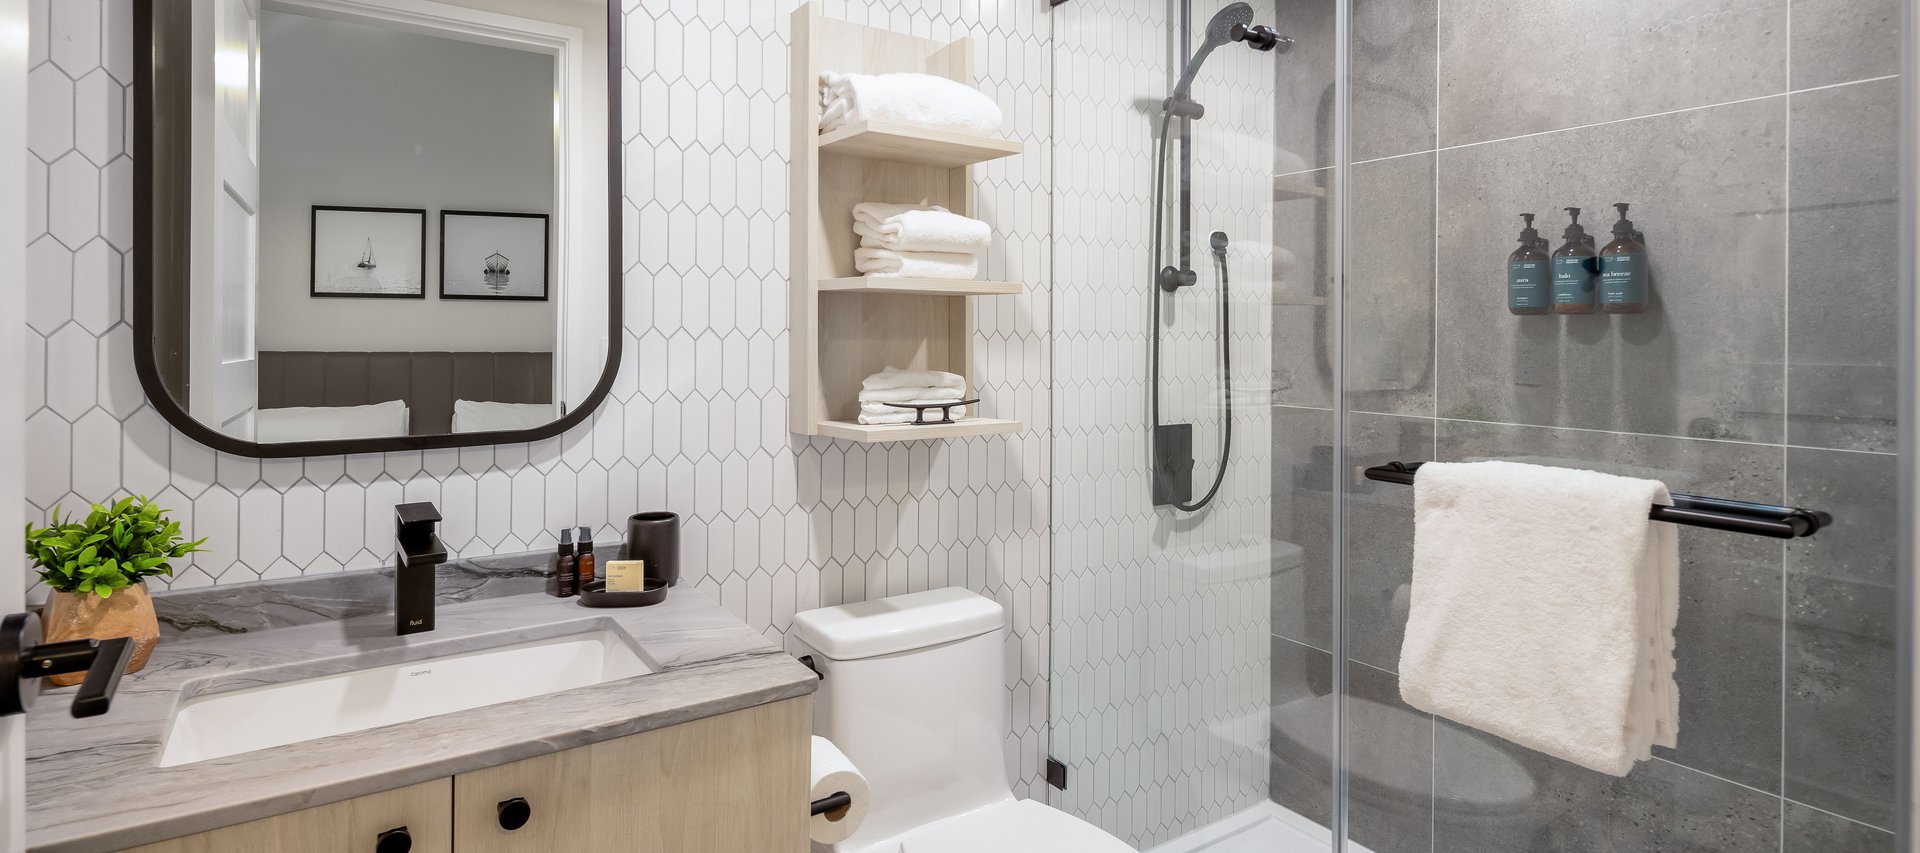 steveston waterfront hotel studio suite luxury bathroom features hand locally made bathroom amenities from fern and petal and standing shower